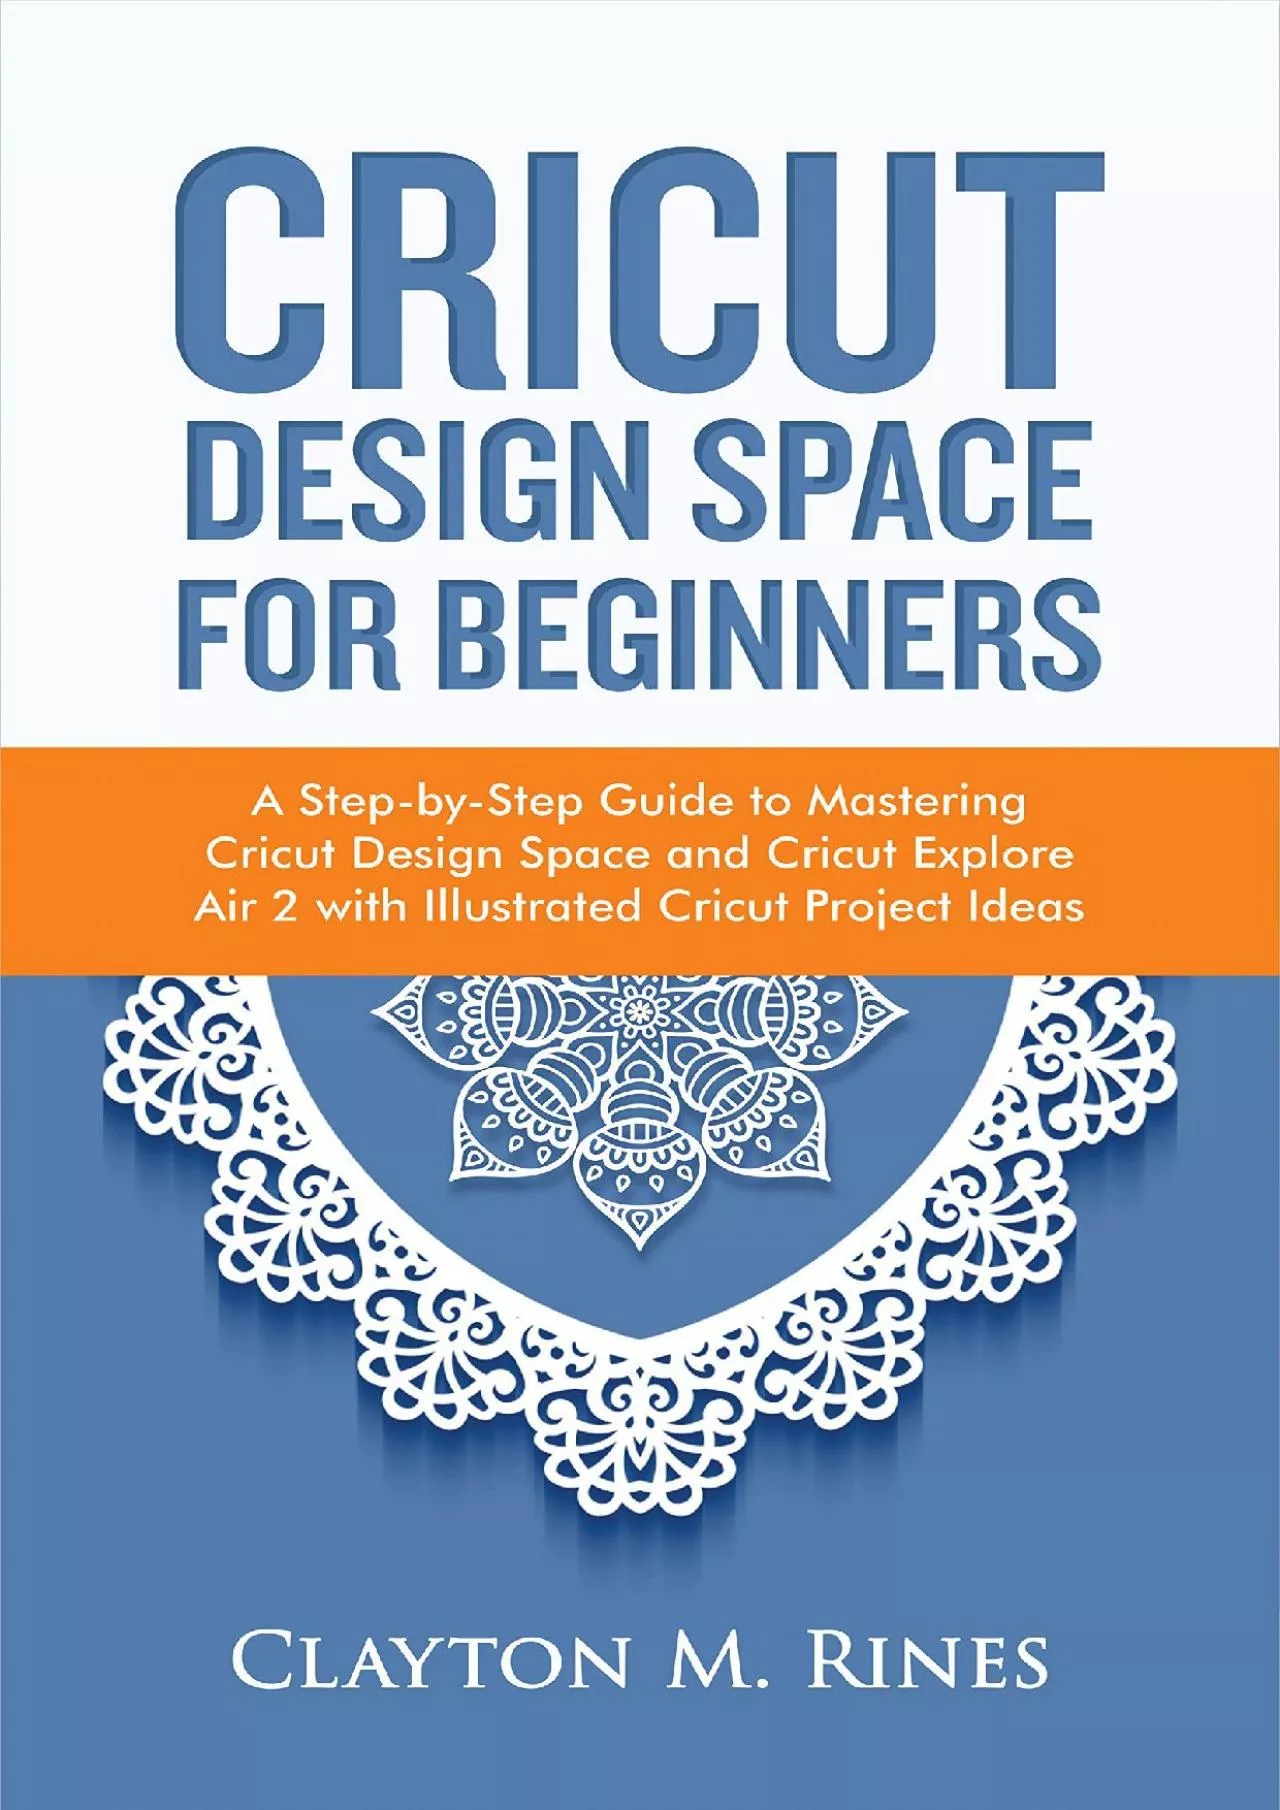 (BOOK)-Cricut Design Space for Beginners: A Step-by-Step Guide to Mastering Cricut Design